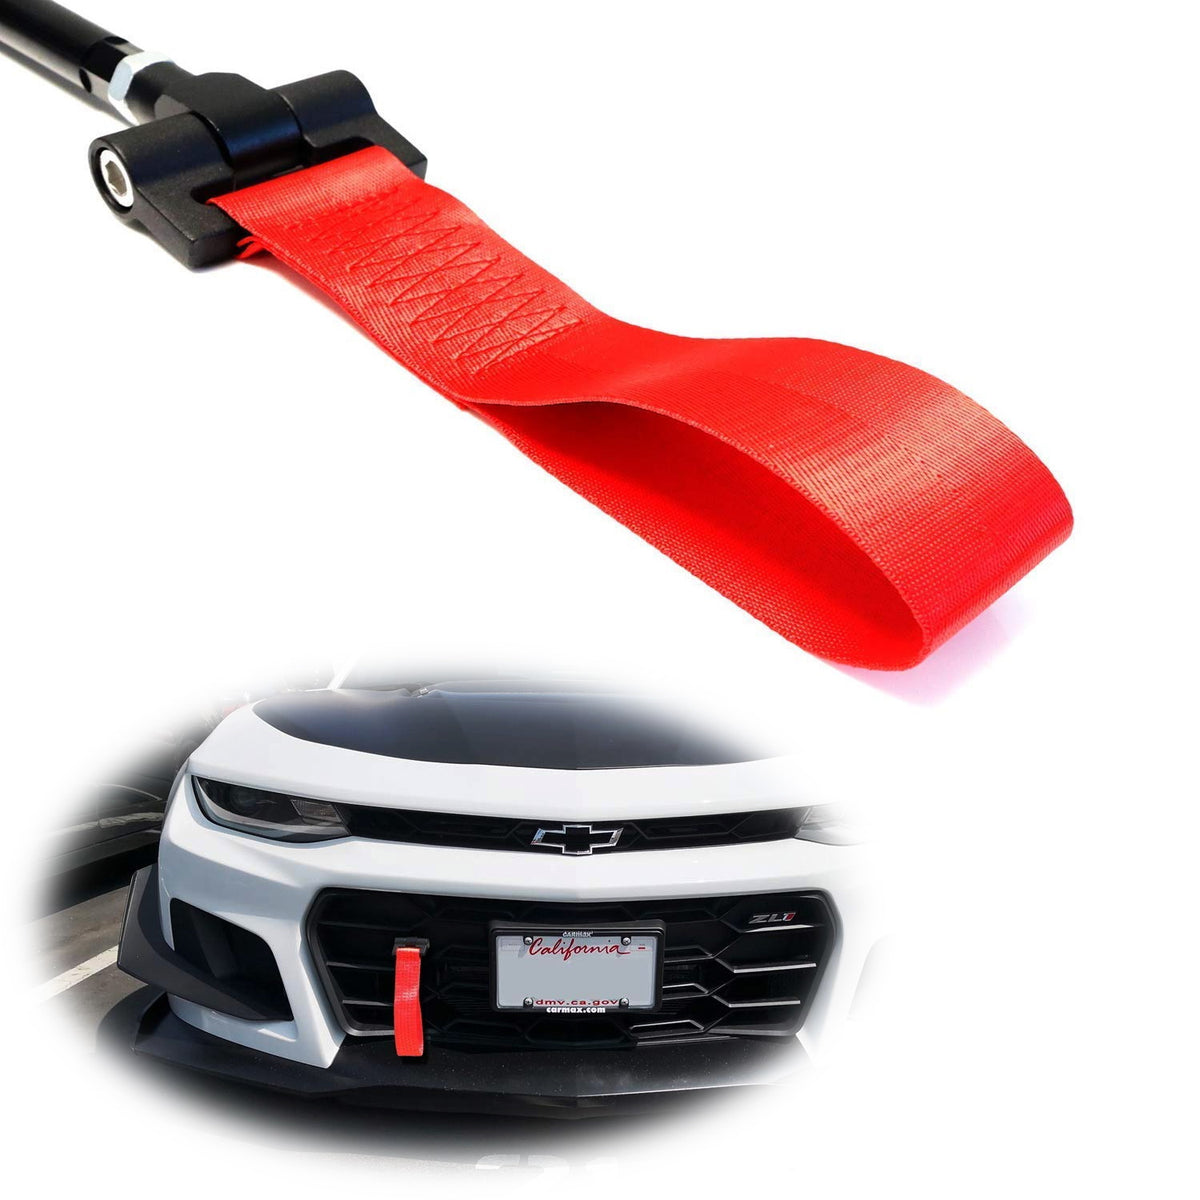 Track Racing Style Nylon Car Tow Hook Strap Towing Bars for BMW 1